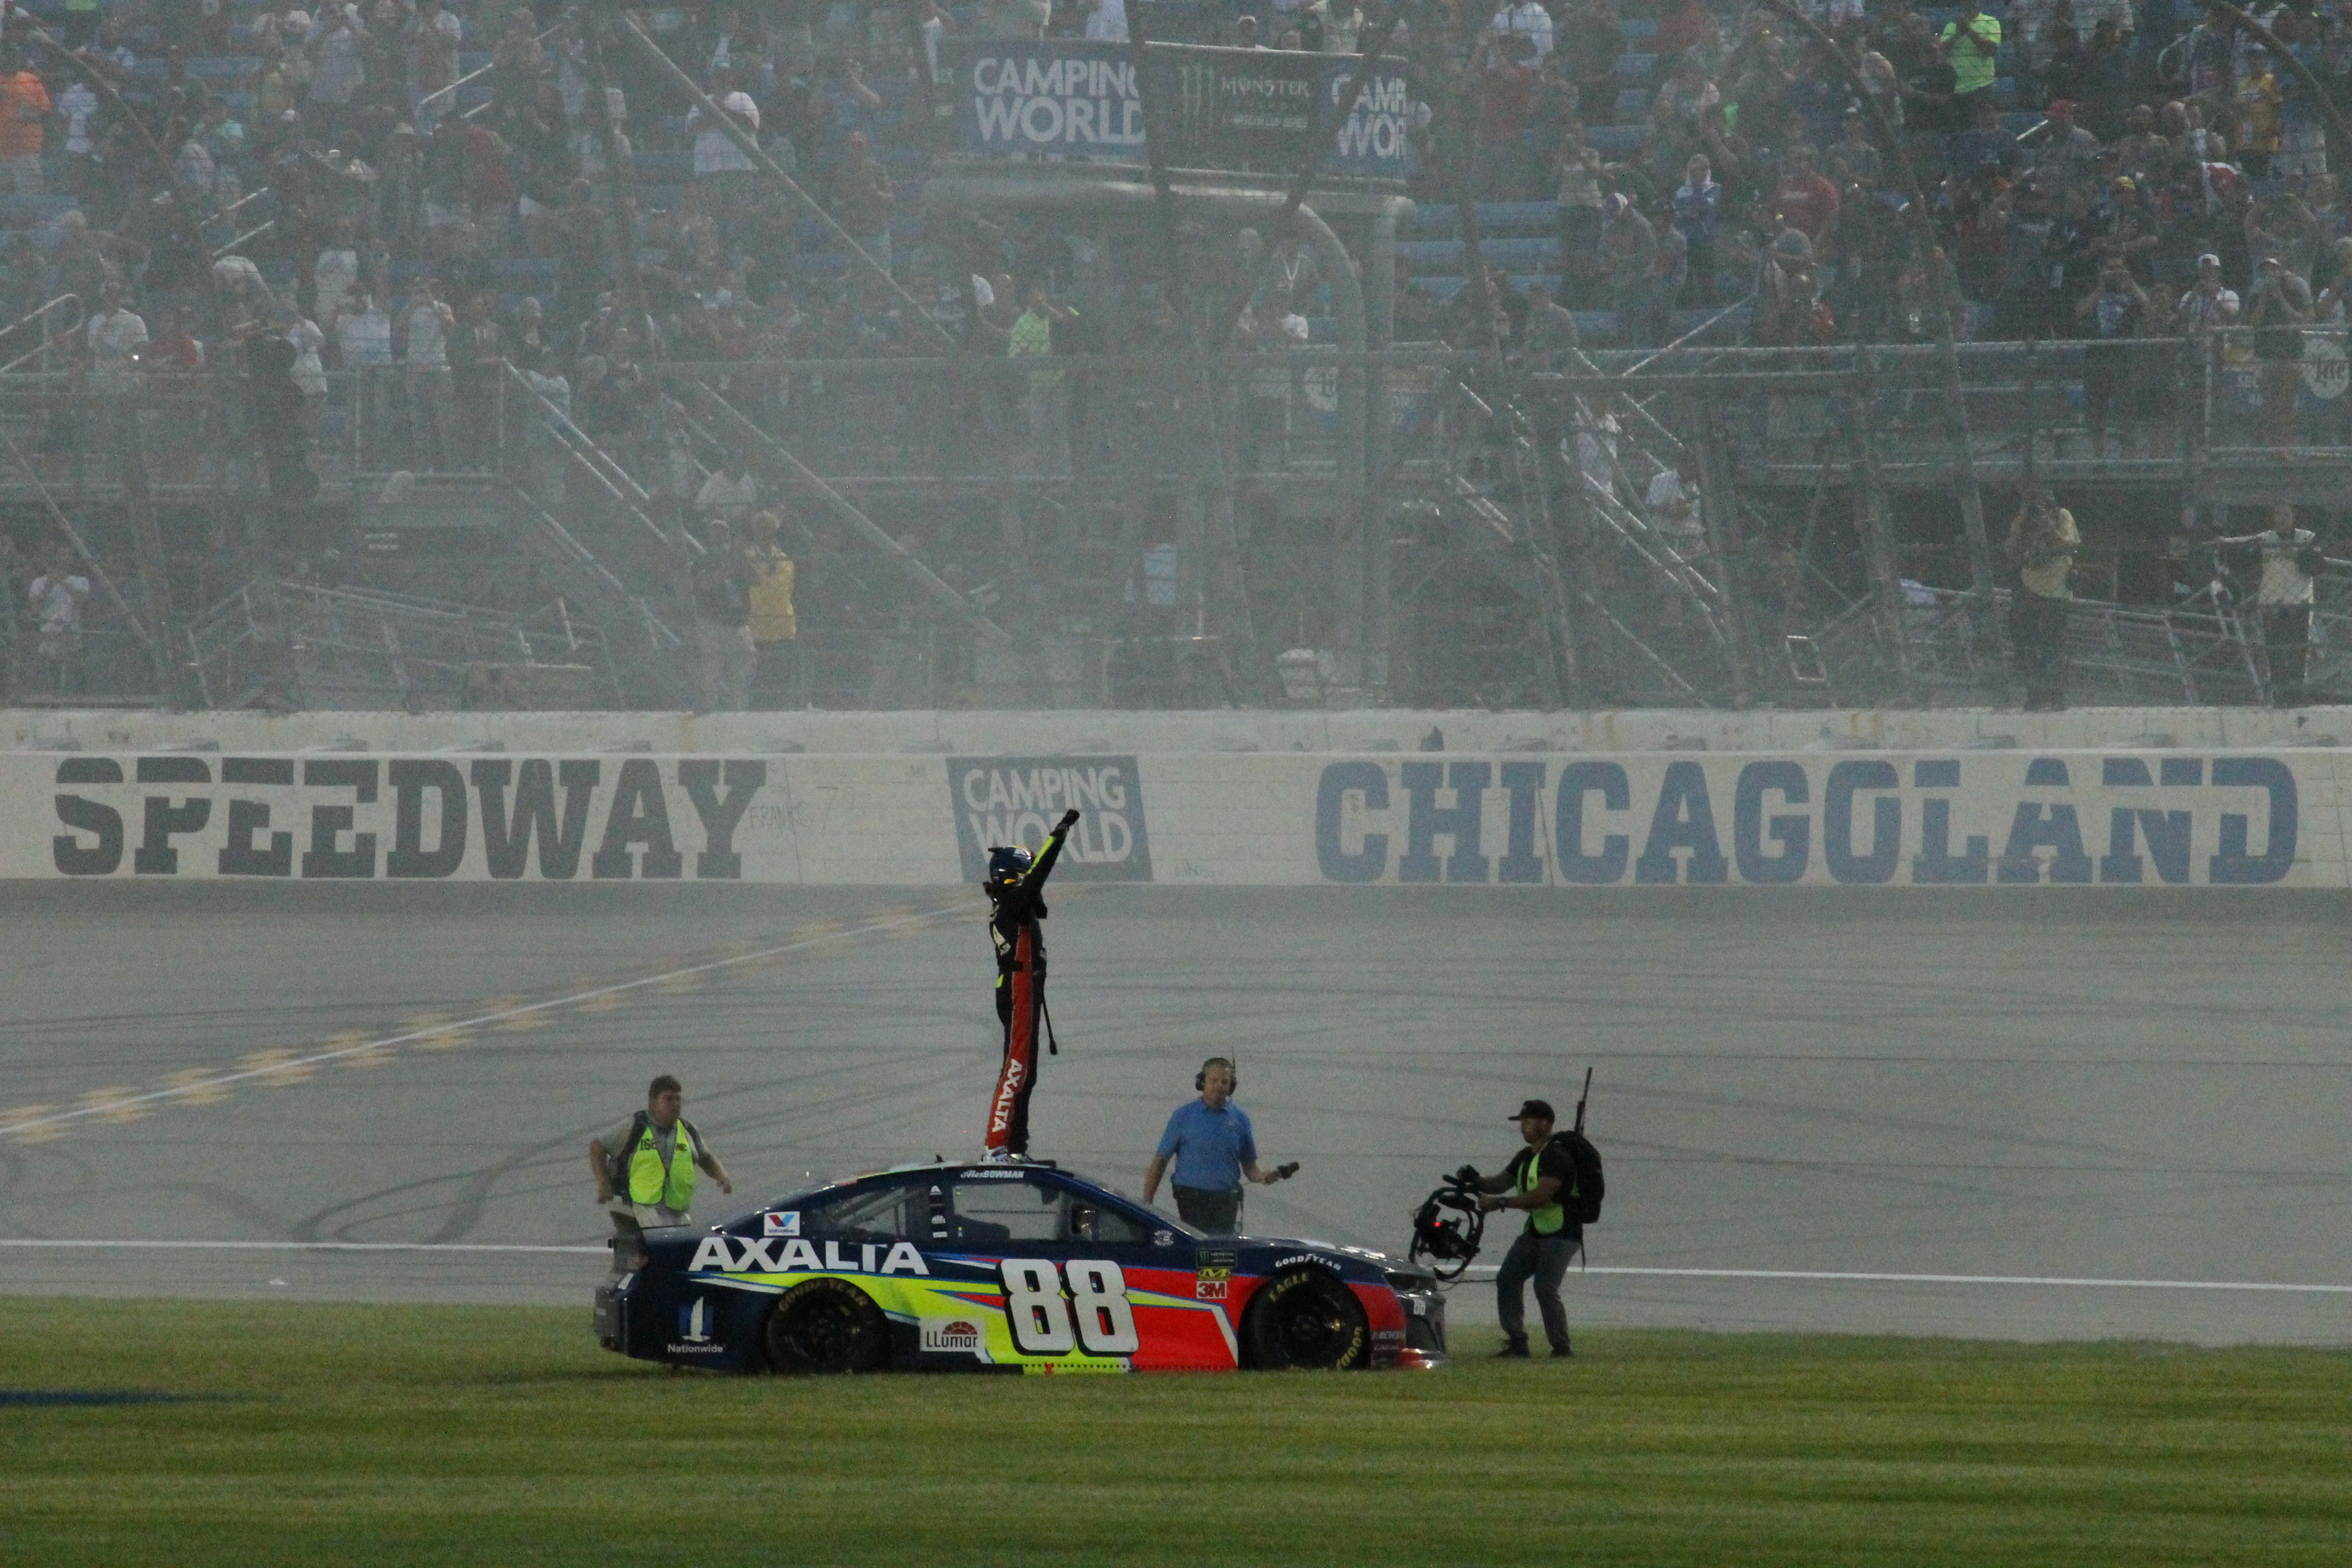 Arms raised in victory, Chicagoland style. (Photo Credit: Matteo Marcheschi/TPF)